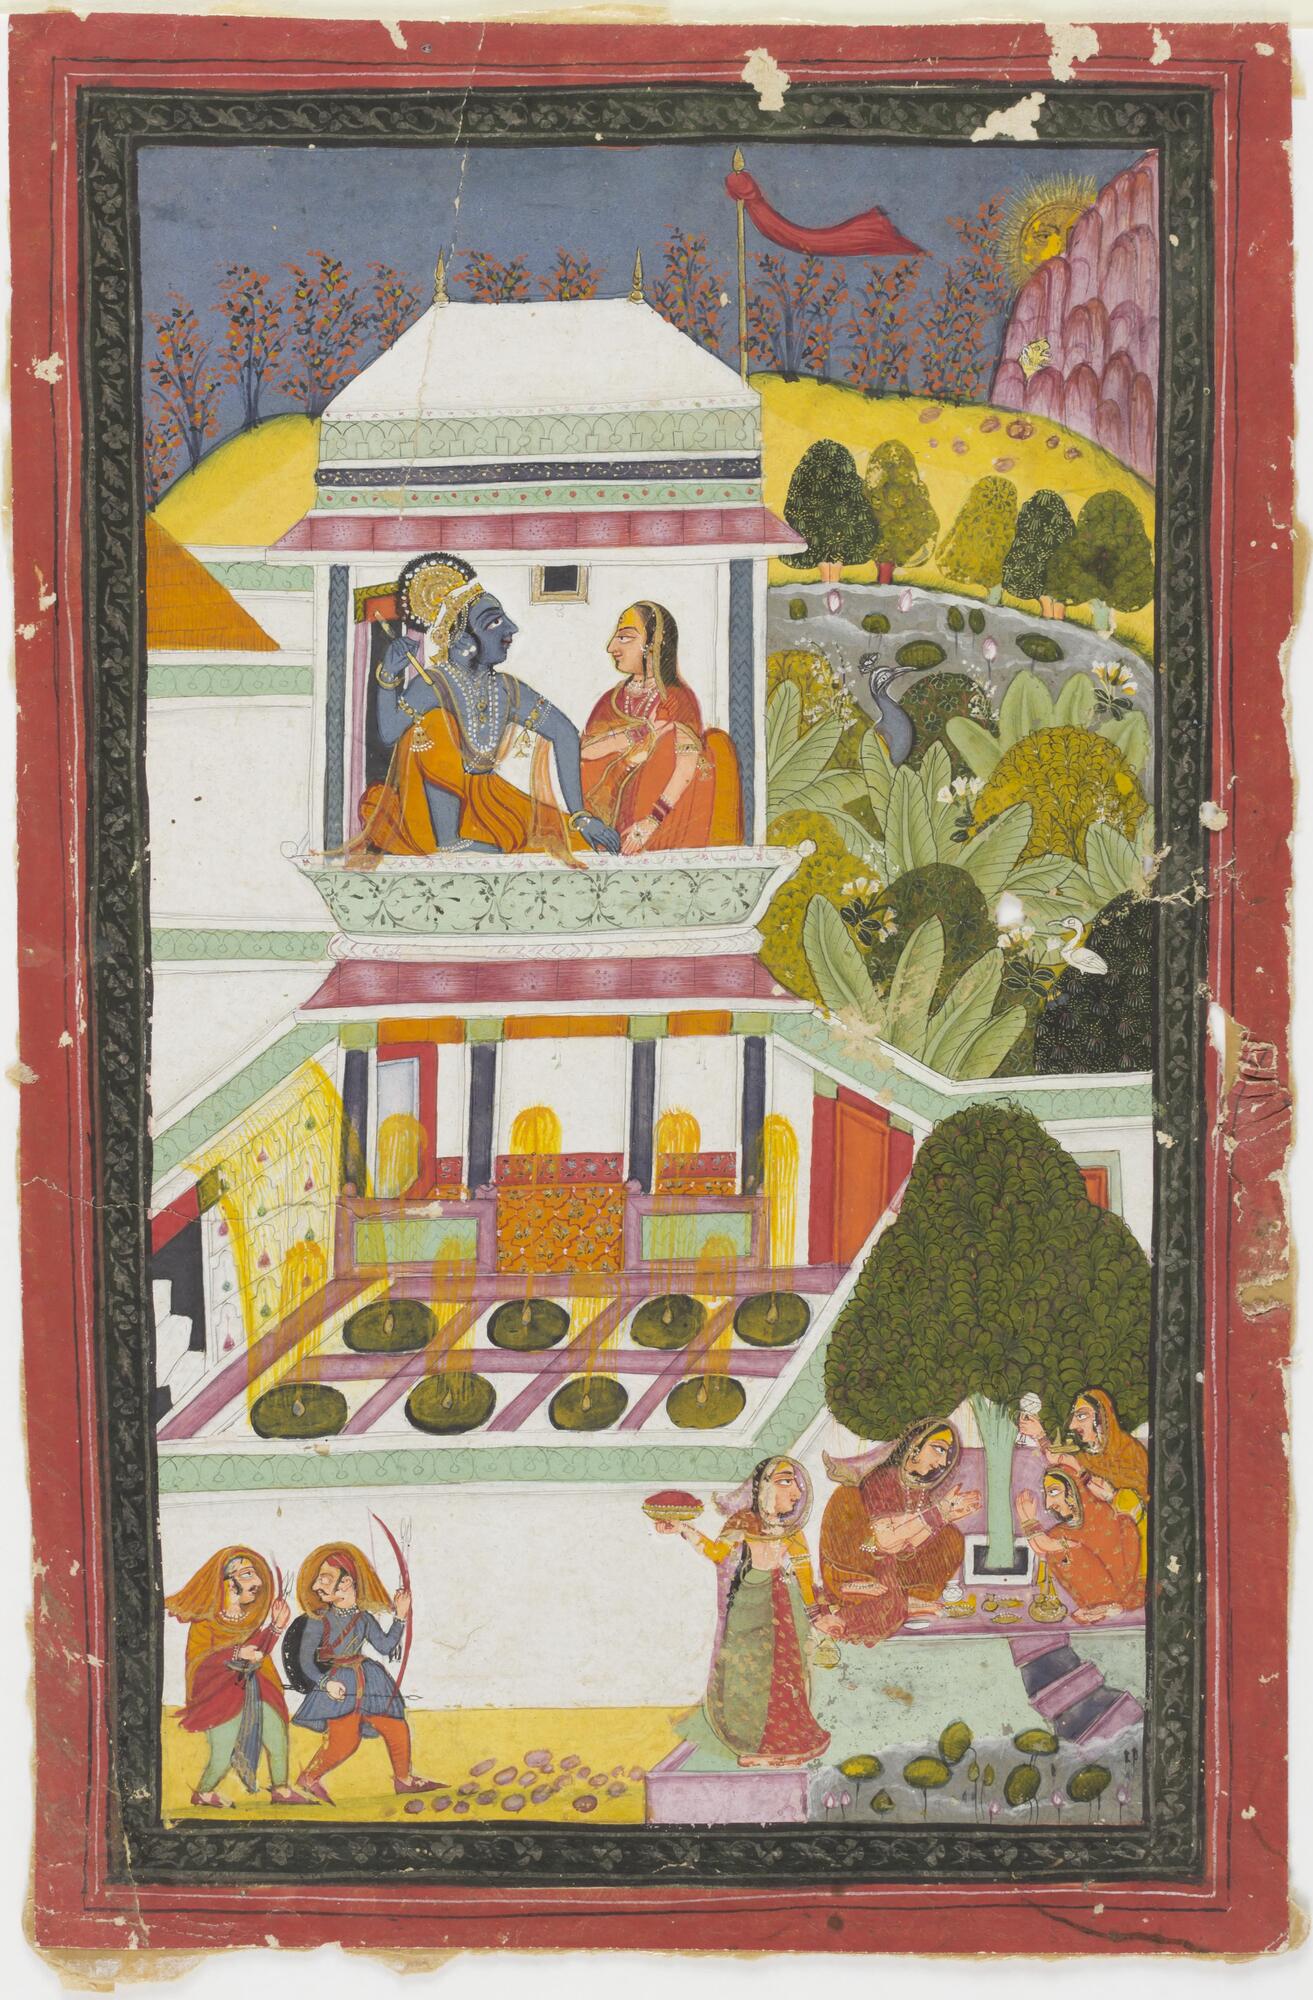 A blue-skinned figure faces a female, who are both seated within a white structure overlooking a courtyard. Outside the walls of the building, two men walk with bows and arrows. To the lower right, four female figures are gathered around a tree.